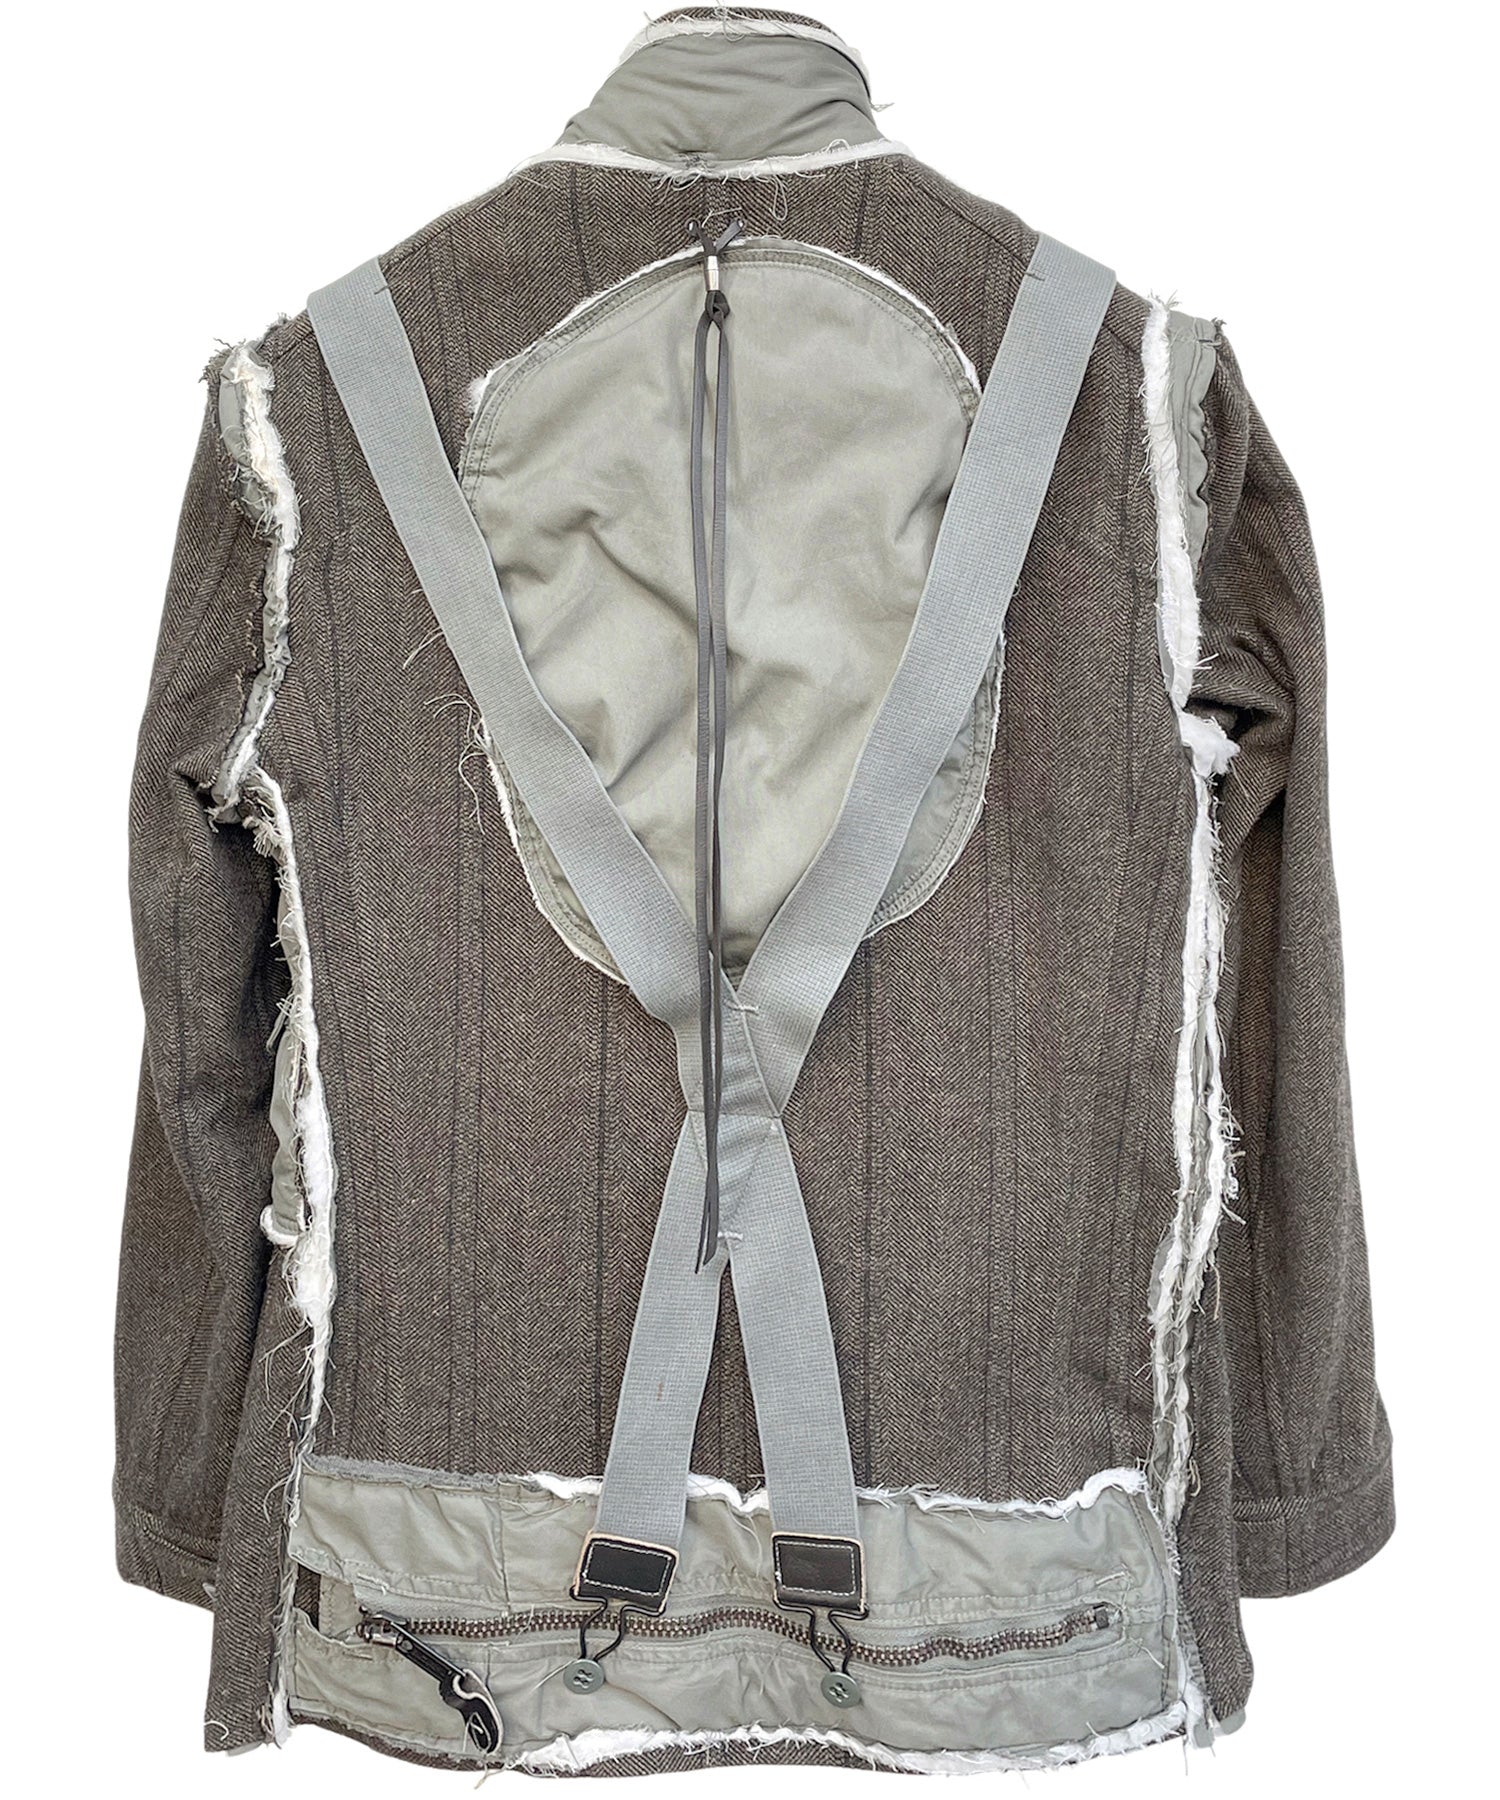 Load image into Gallery viewer, [One-of-a-kind item] Remake parachute jacket / KHAKI / M size